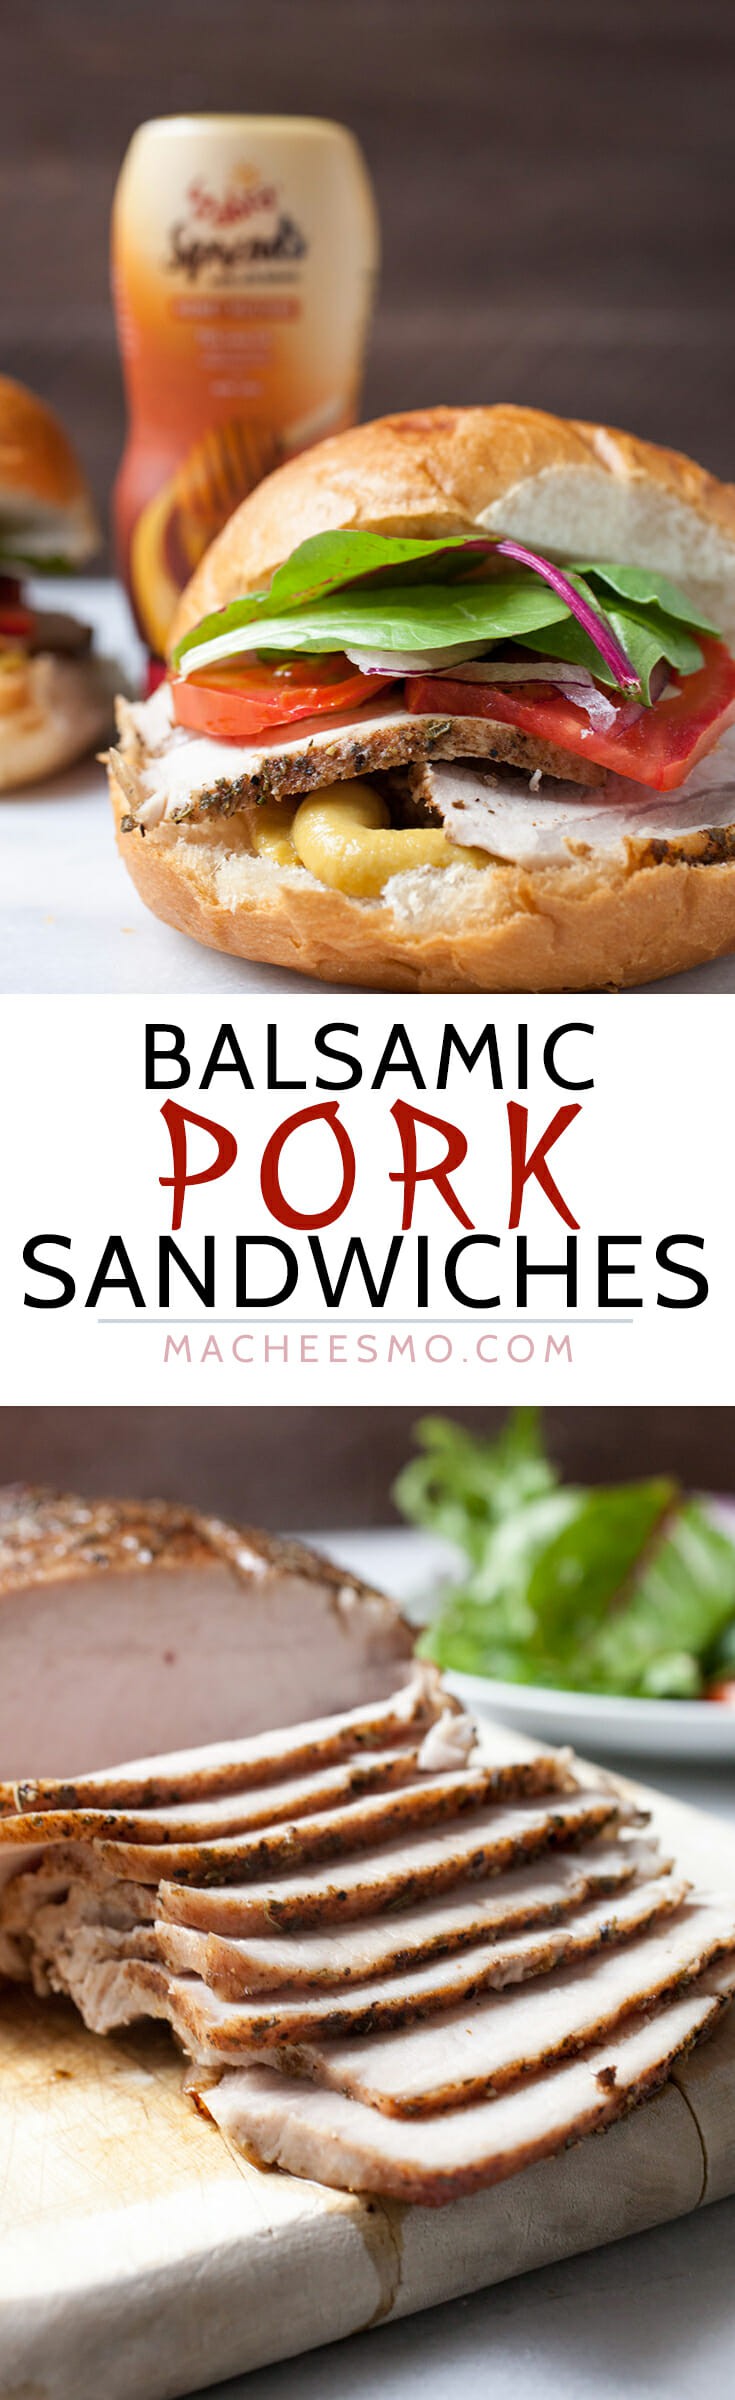 Balsamic Roasted Pork Sandwiches: Slow roasted pork glazed with a simple balsamic sauce, sliced thin, and served with honey mustard sauce and fresh veggies. Such a great sandwich! | macheesmo.com